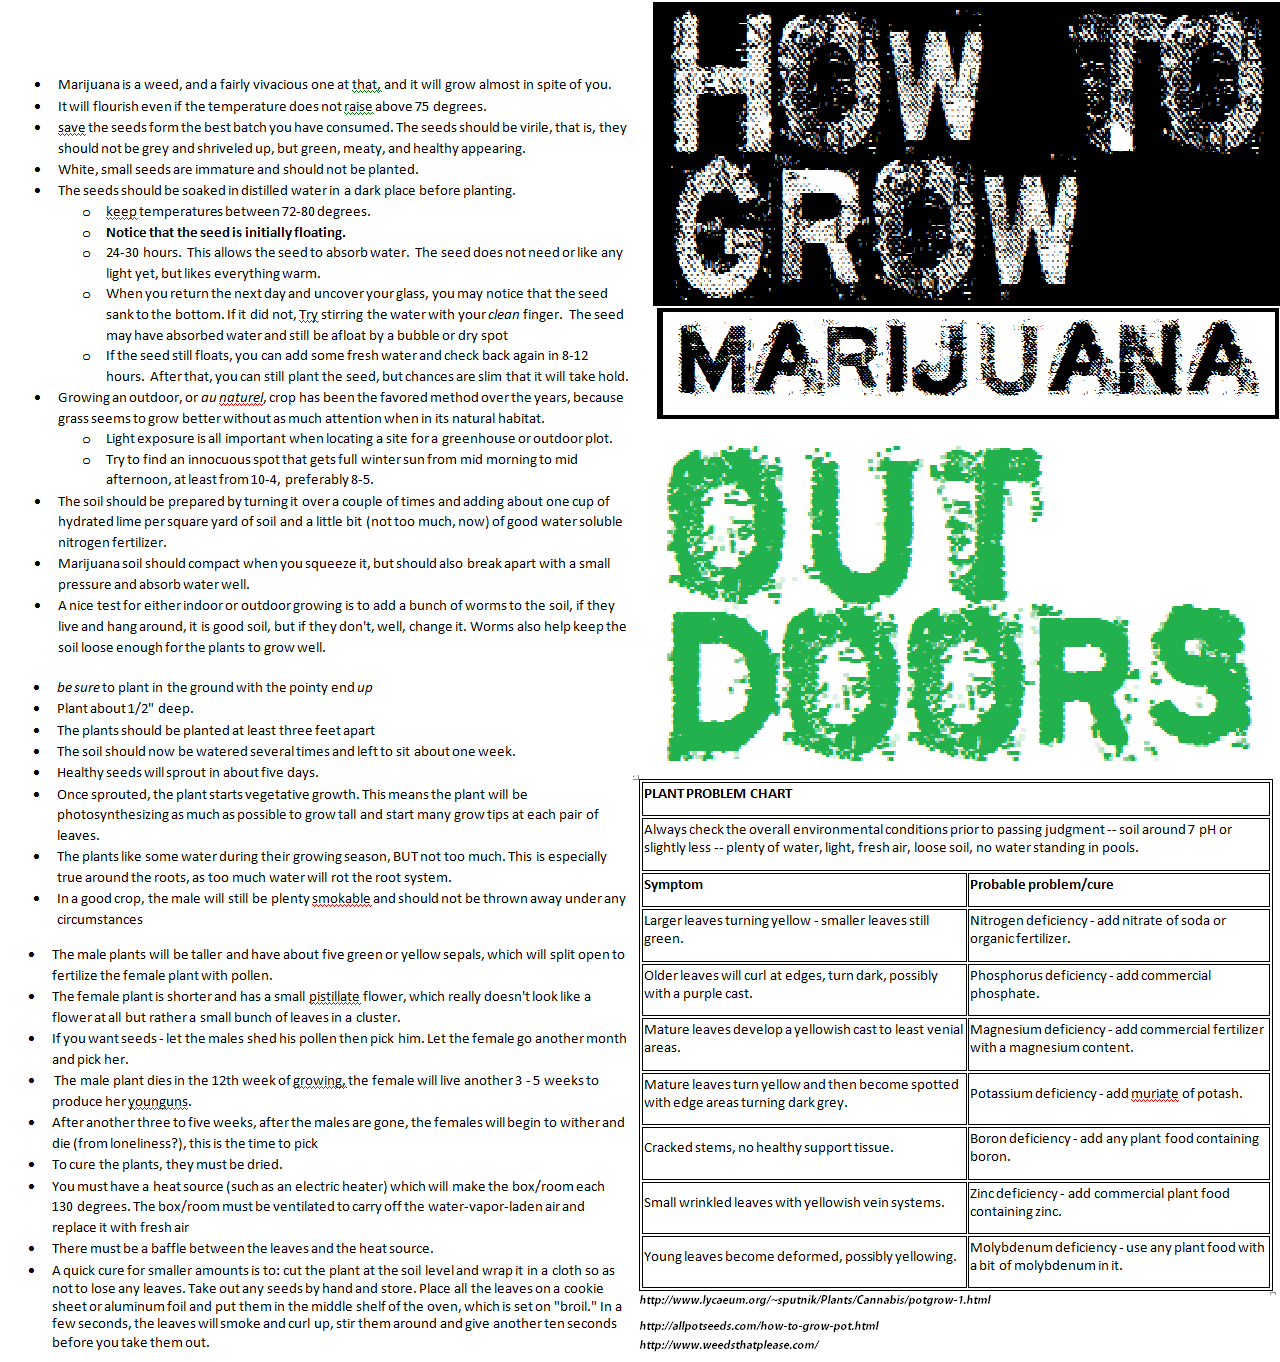 Here is an information guide on how to grow outdoor marijuana.